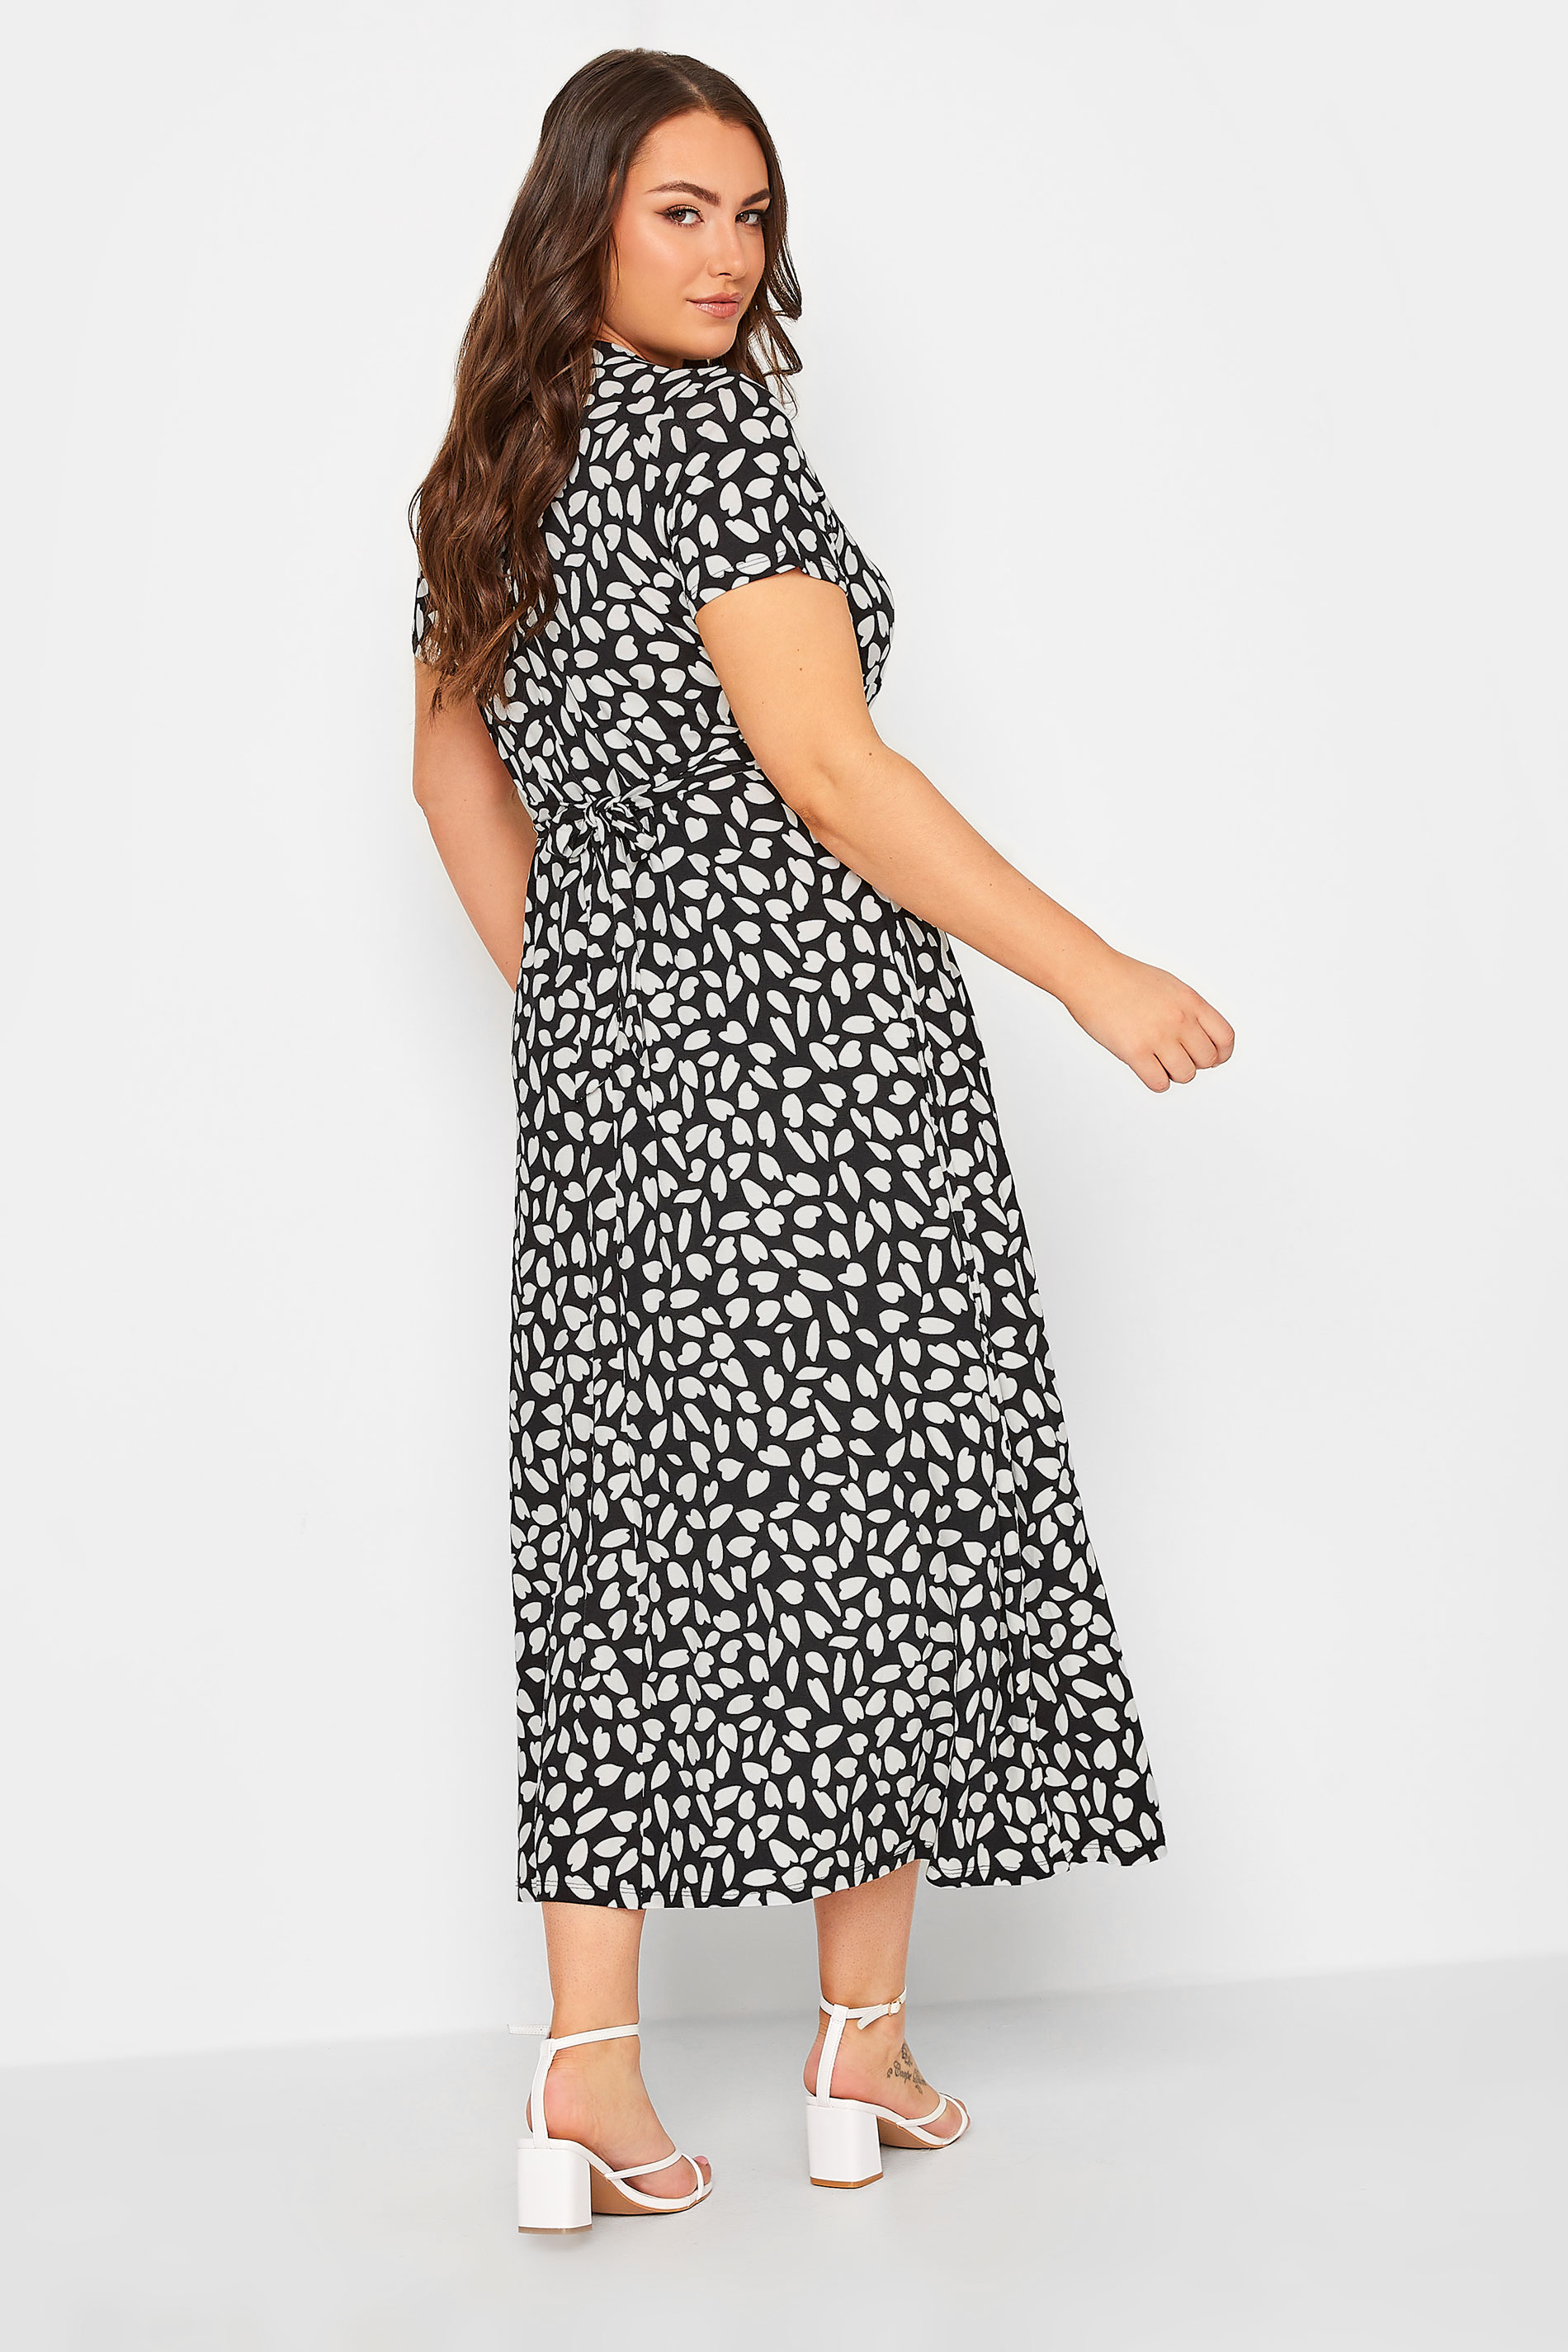 YOURS Curve Plus Size Black Animal Print Maxi Dress | Yours Clothing  3